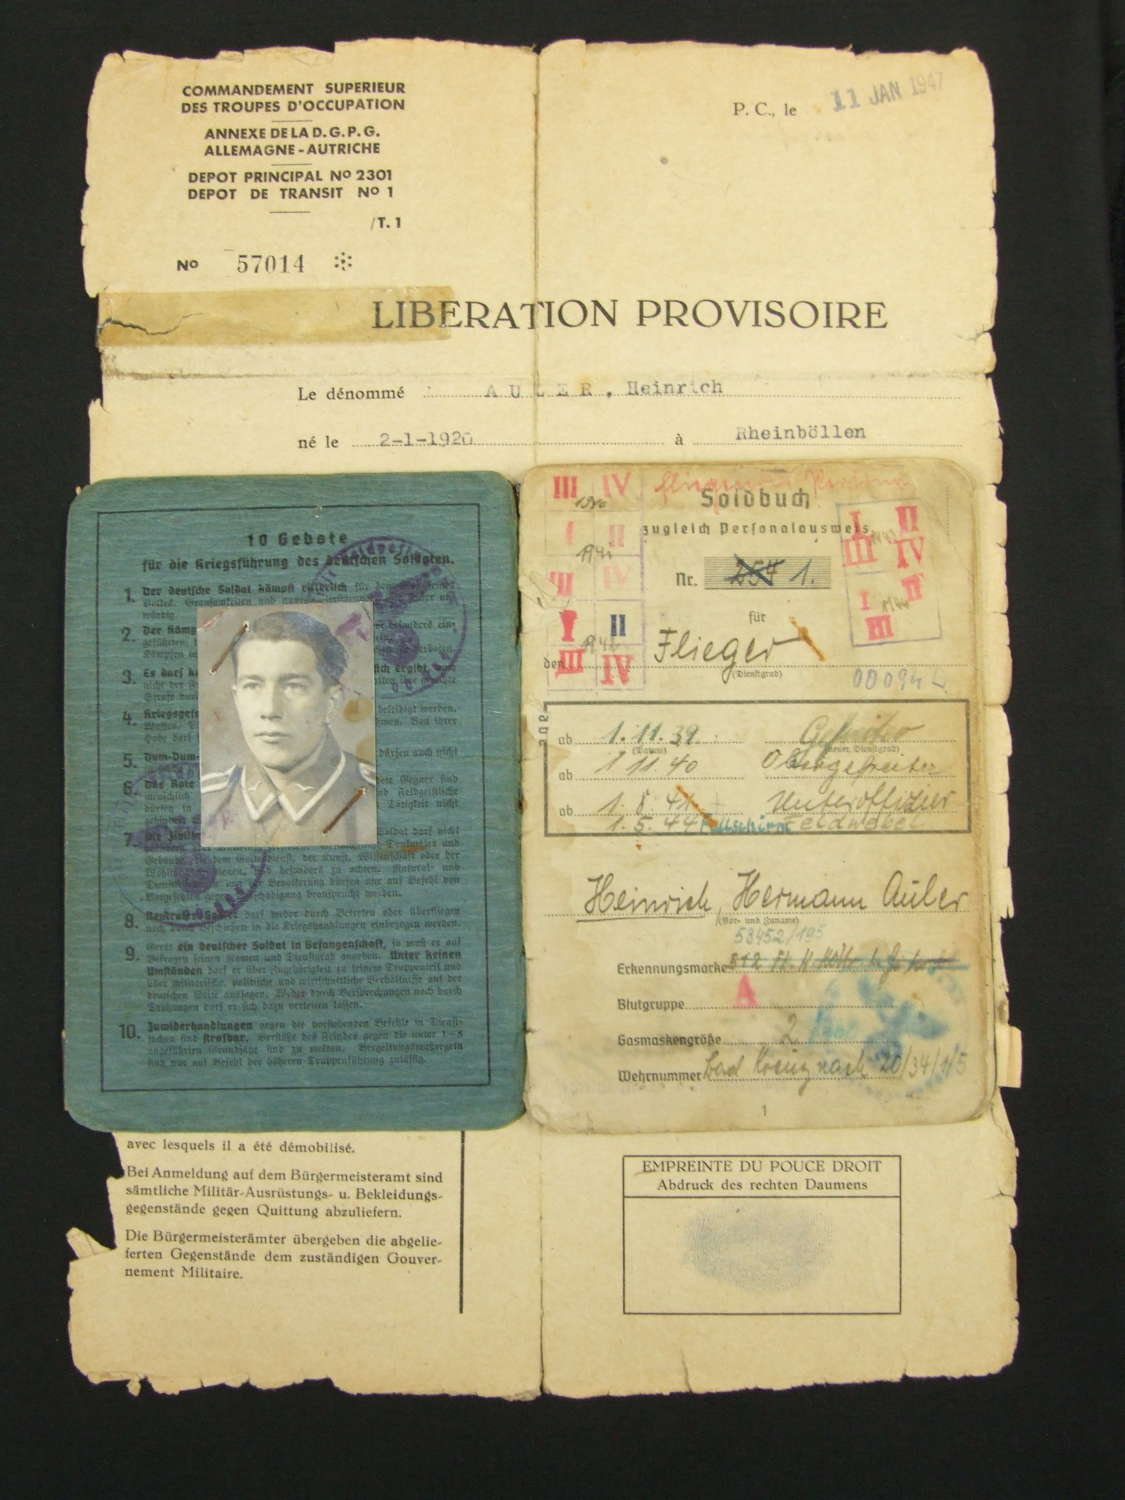 Luftwaffe Soldbuch and POW Release Certificate to Fallschirmjager